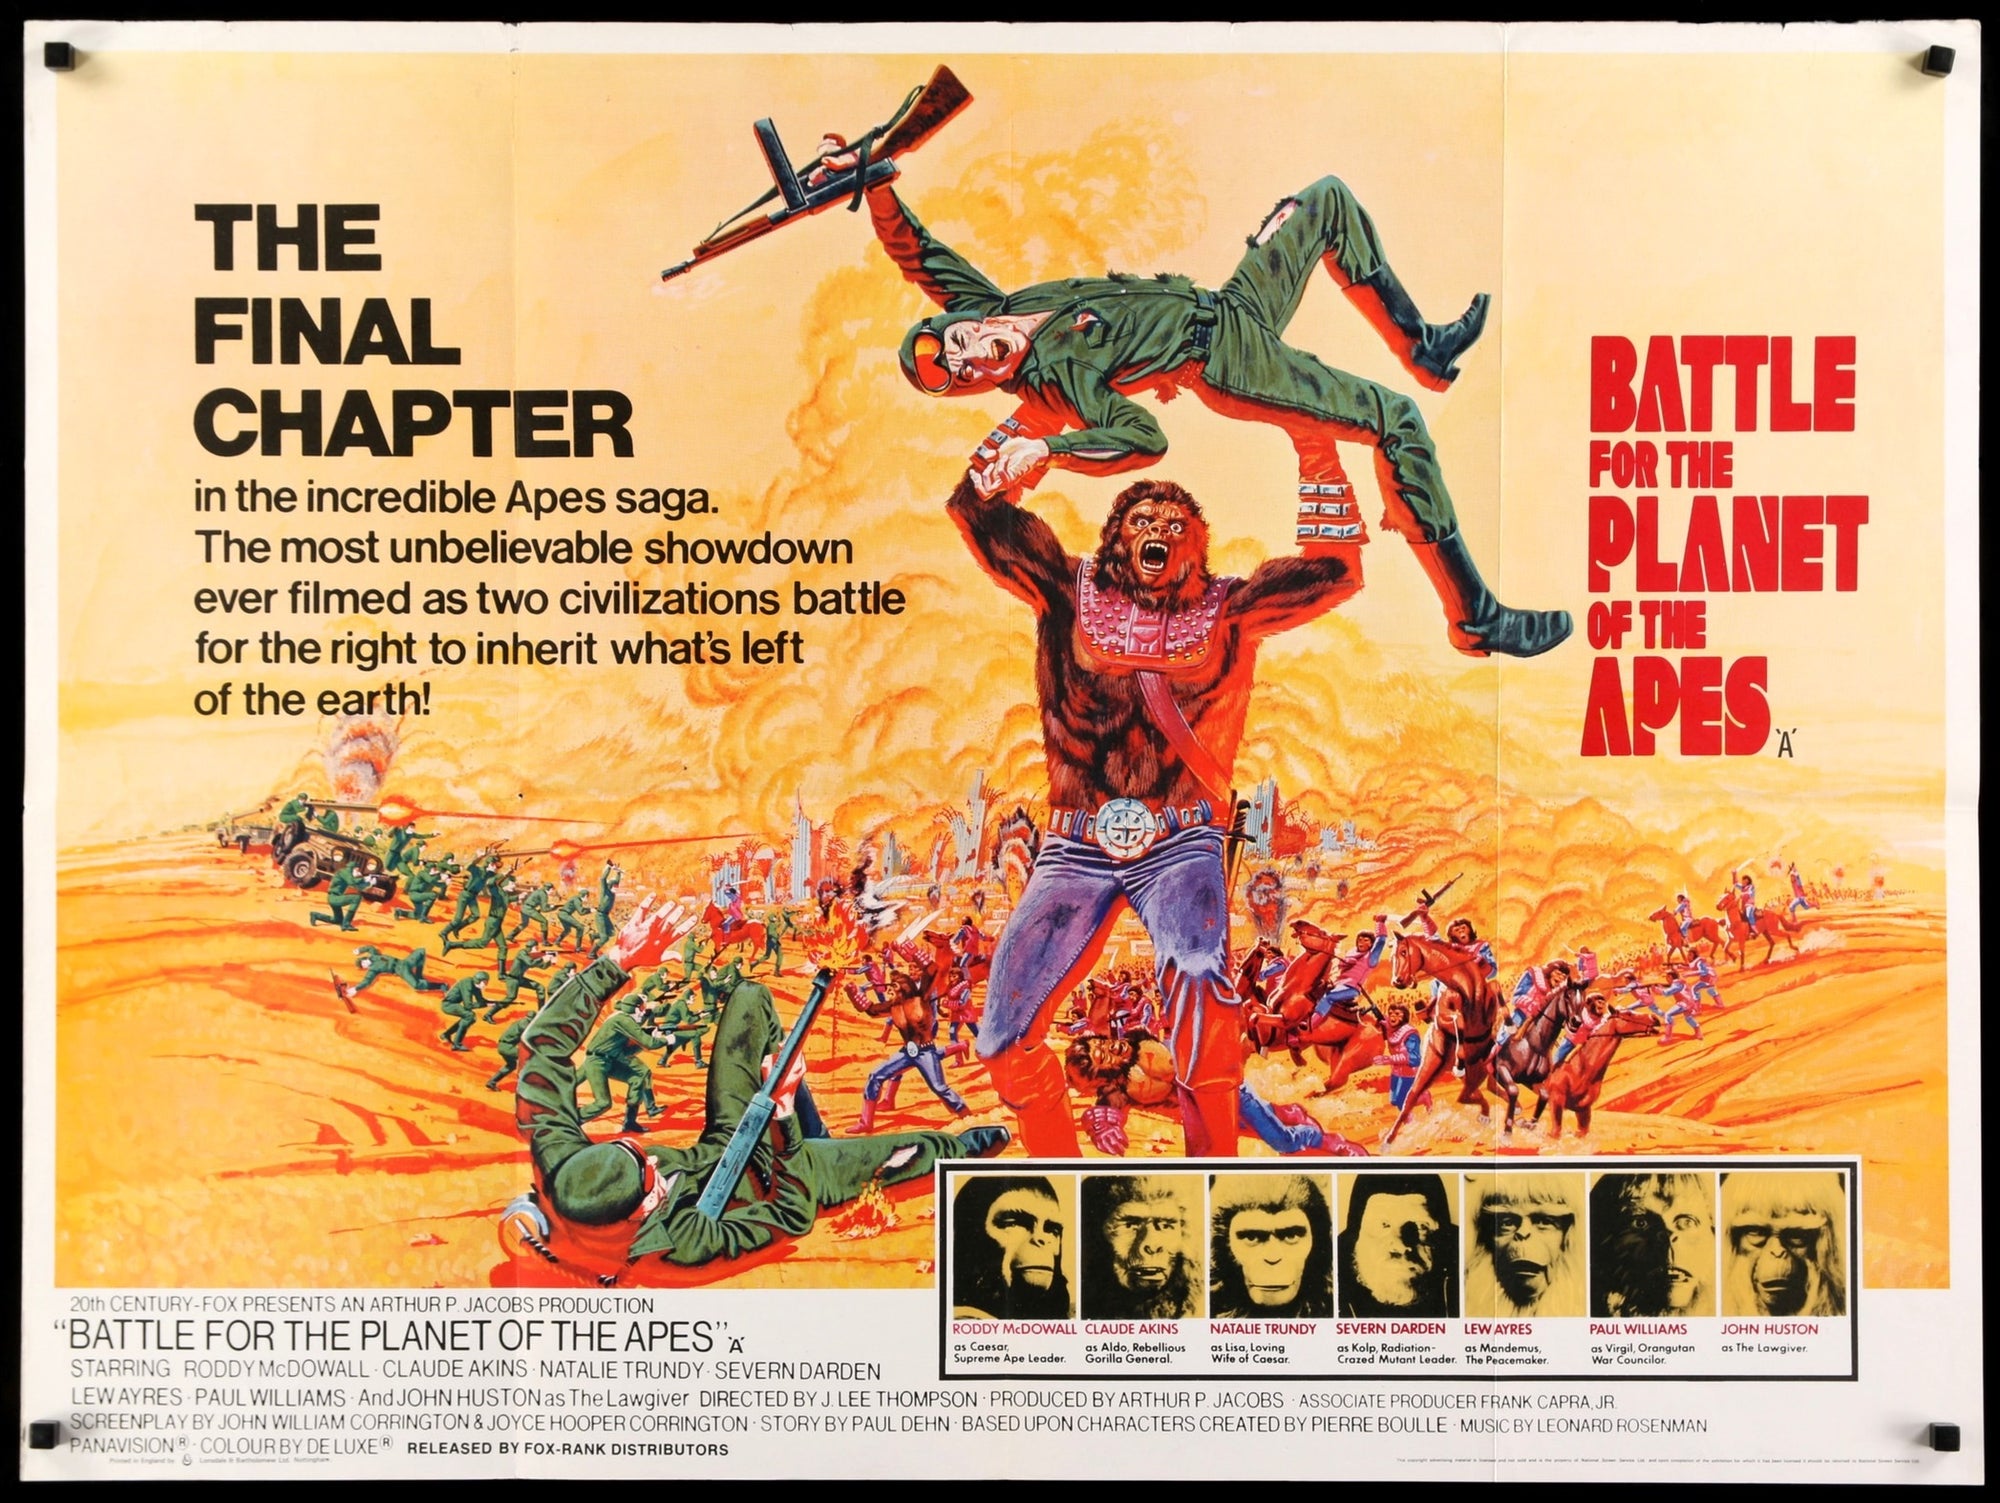 Battle For the Planet of the Apes (1973) original movie poster for sale at Original Film Art